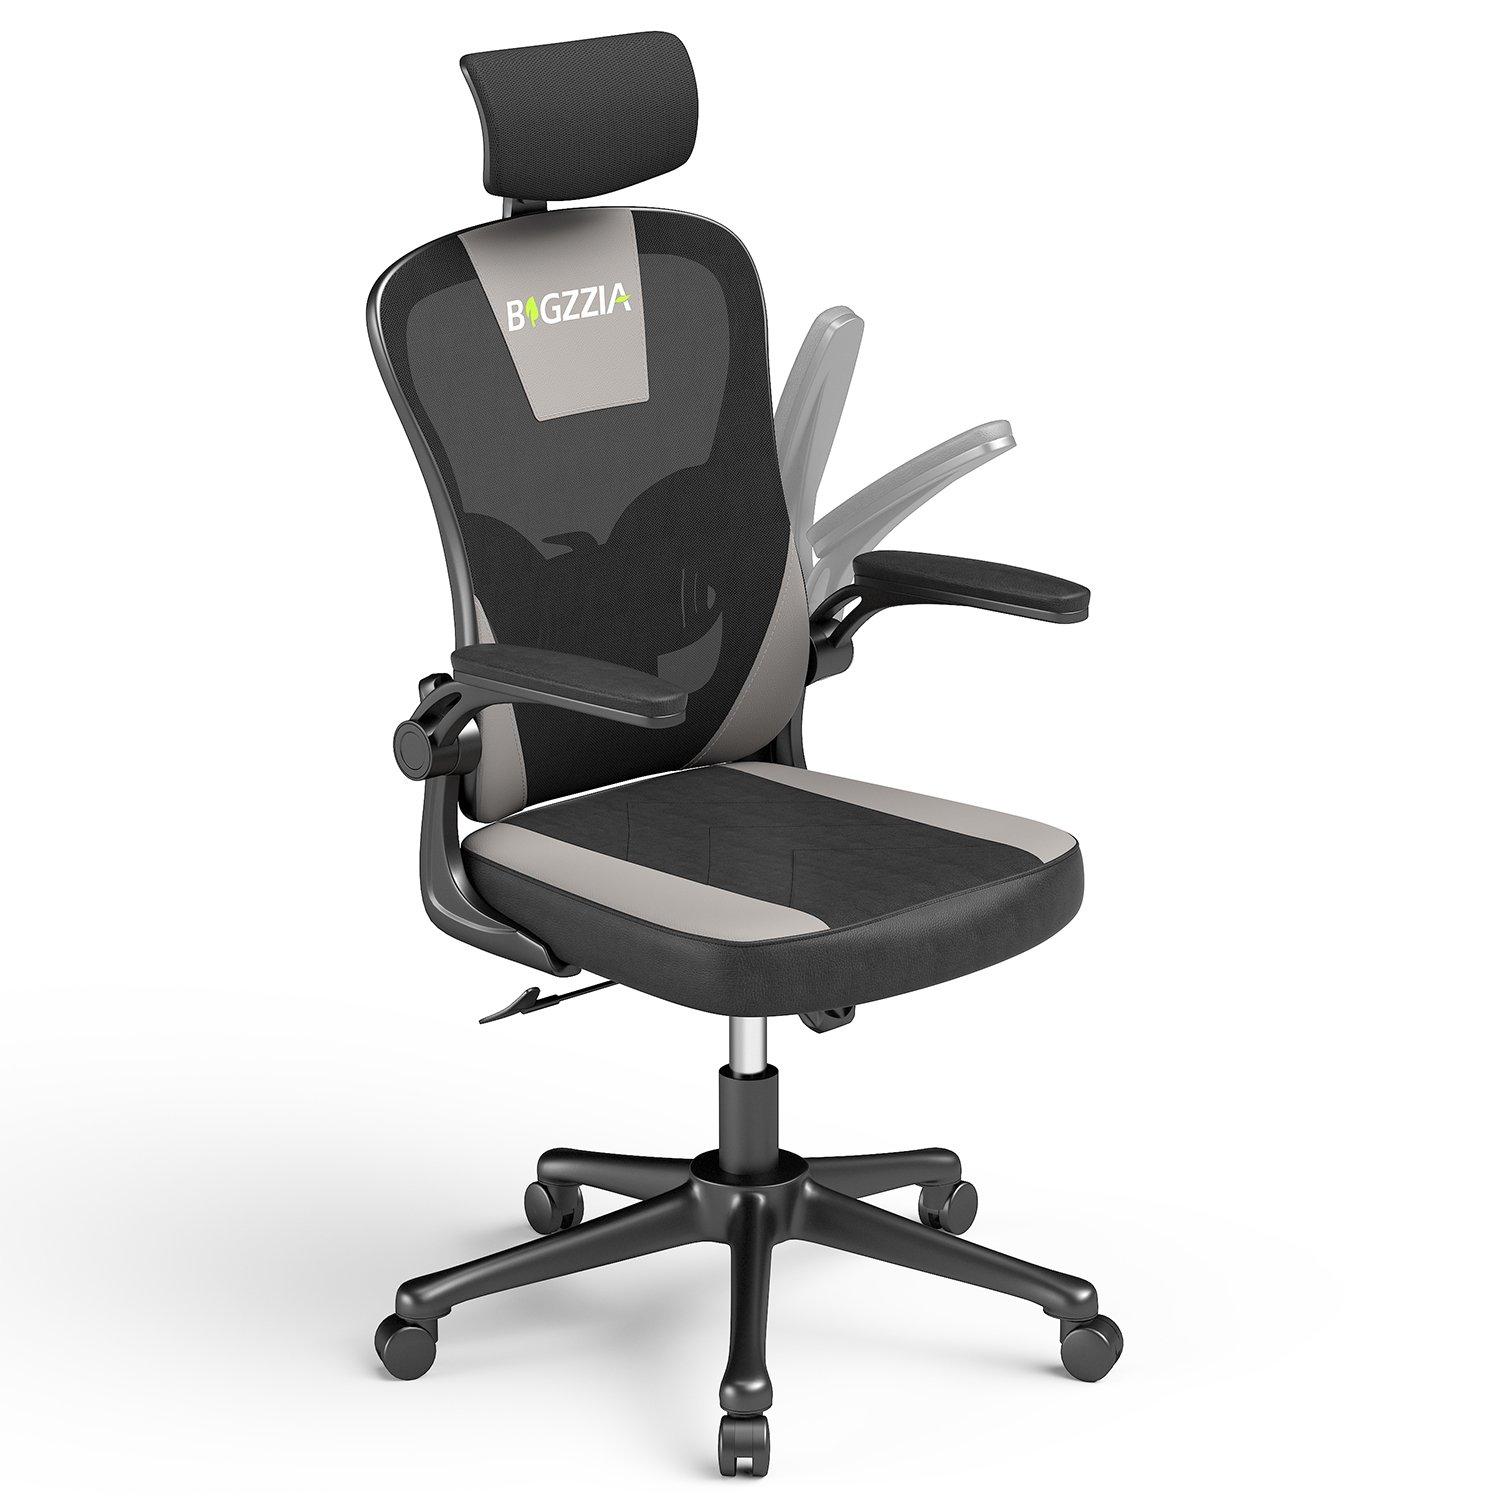 Computer Desk Chair with Adjustable Headrest for Meeting Room and Office